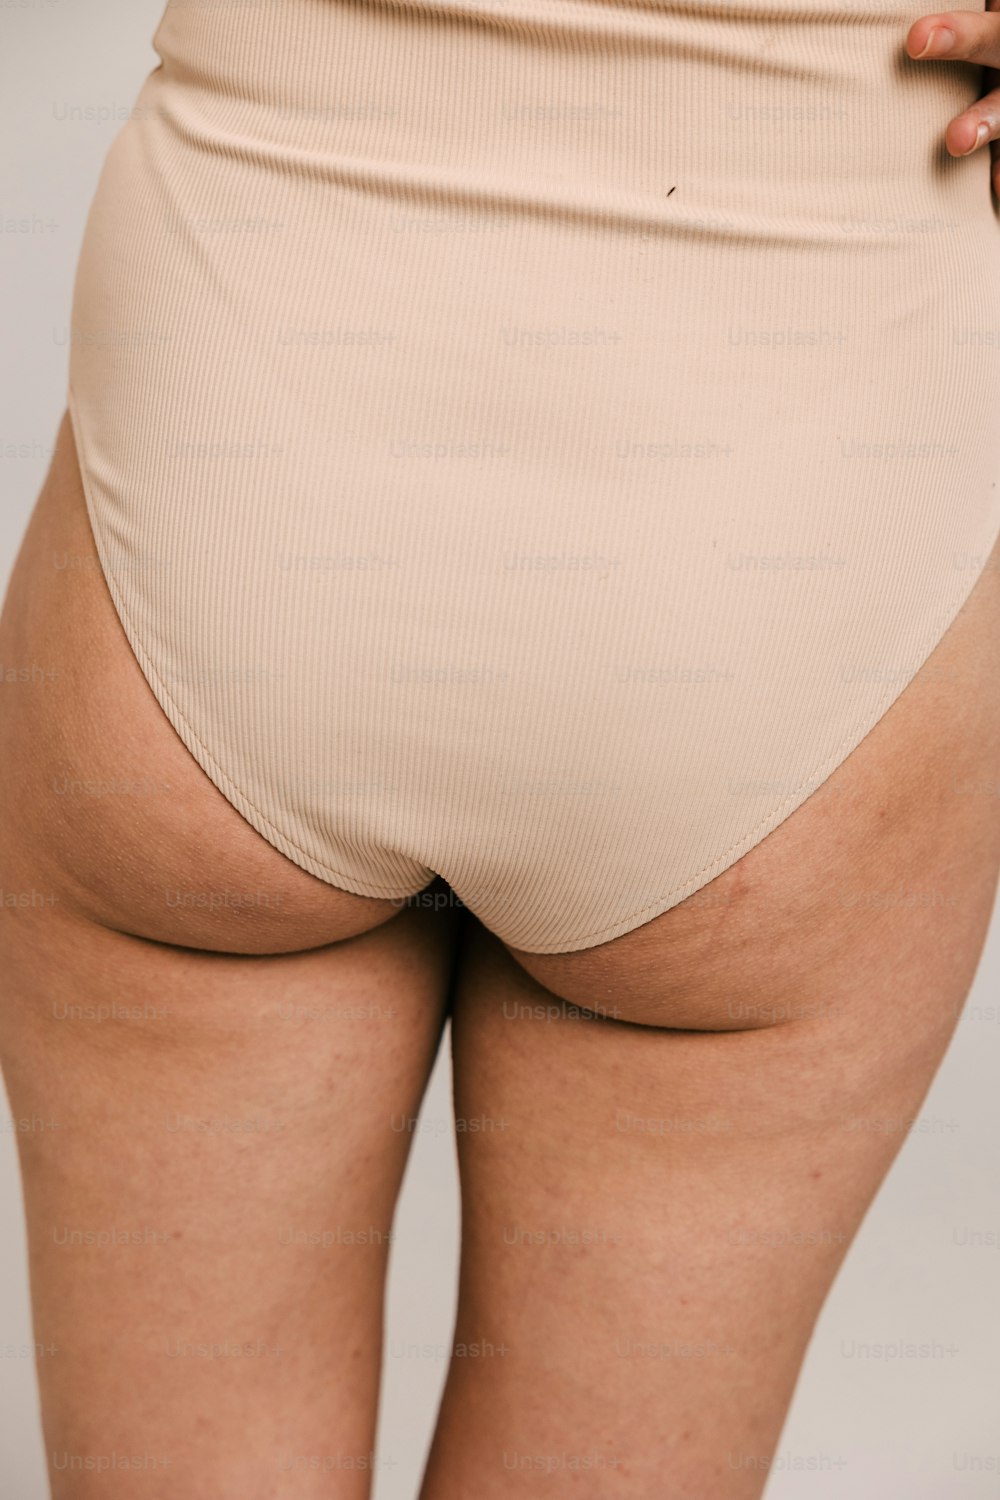 A woman in a tan panties showing her butt photo – Bottom Image on Unsplash